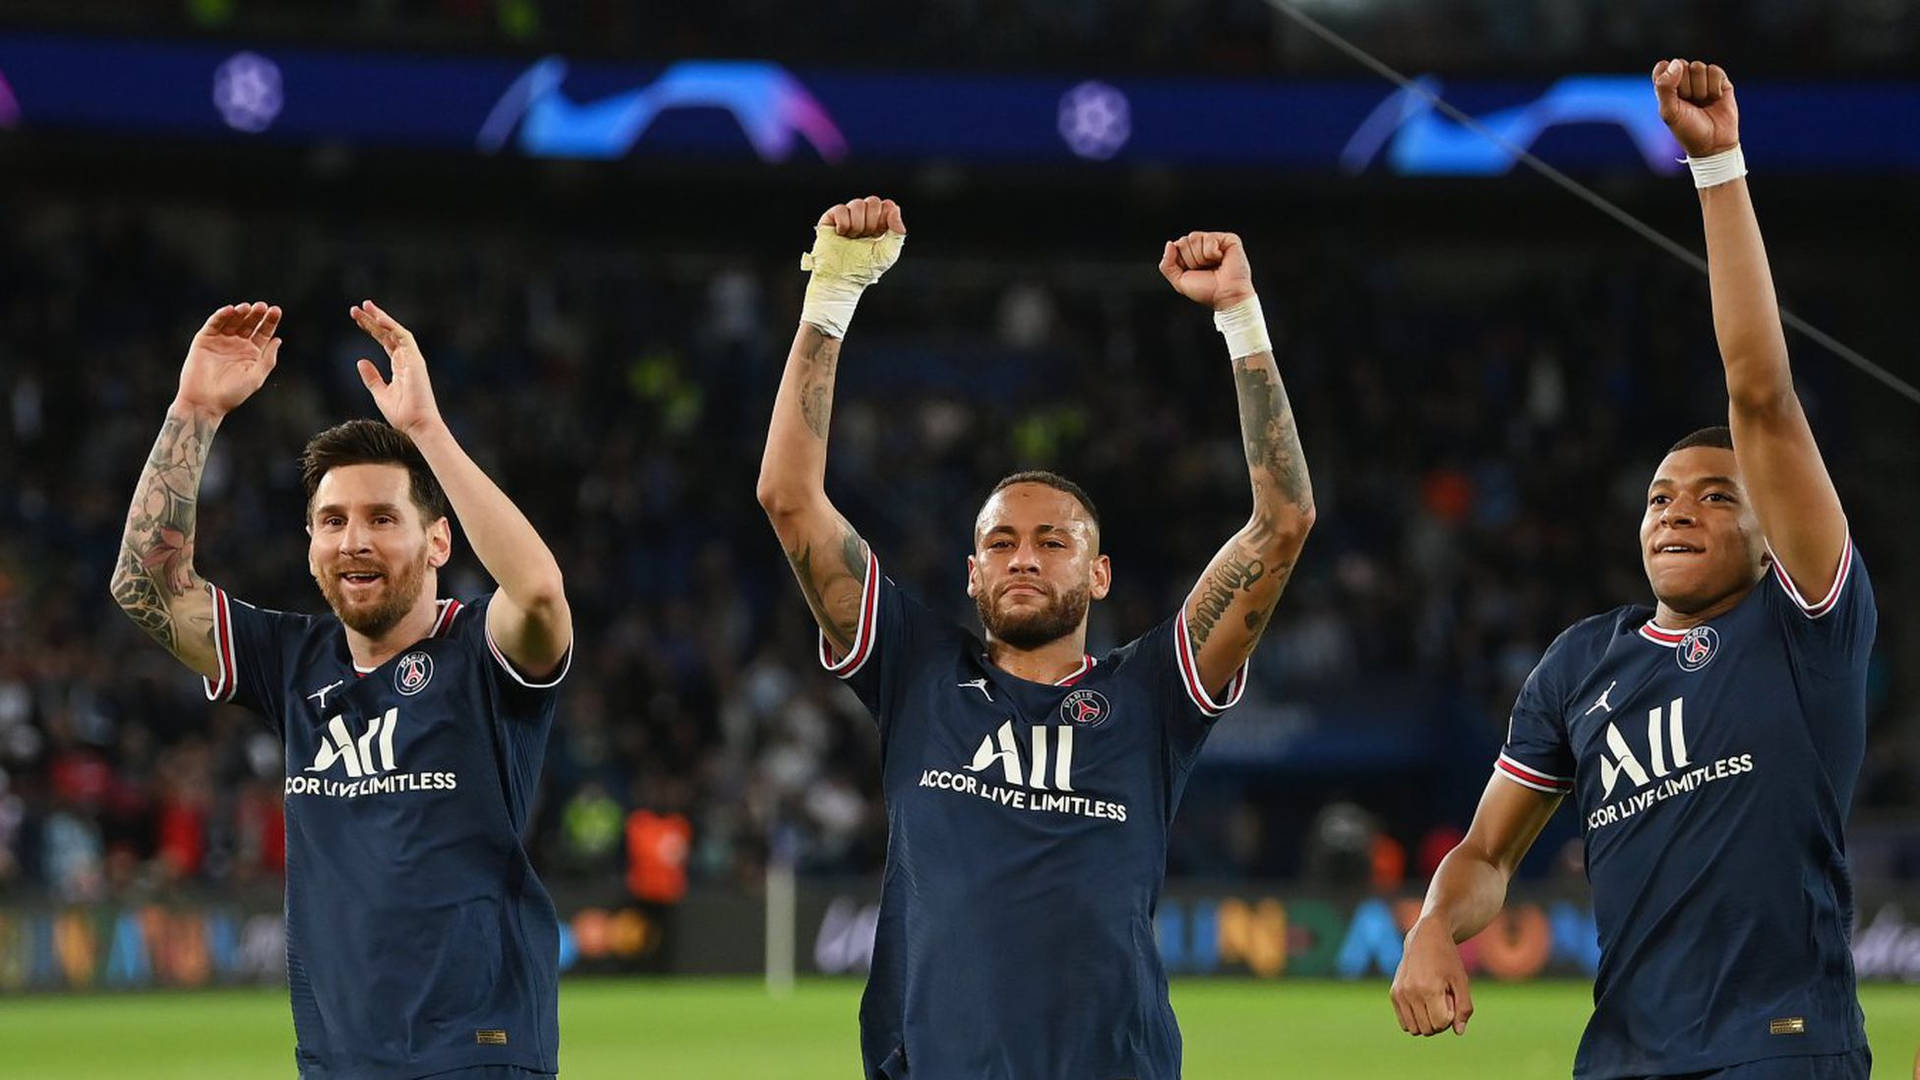 Lionel Messi sends message to Neymar and Kylian Mbappe after first PSG goal   Football  Metro News